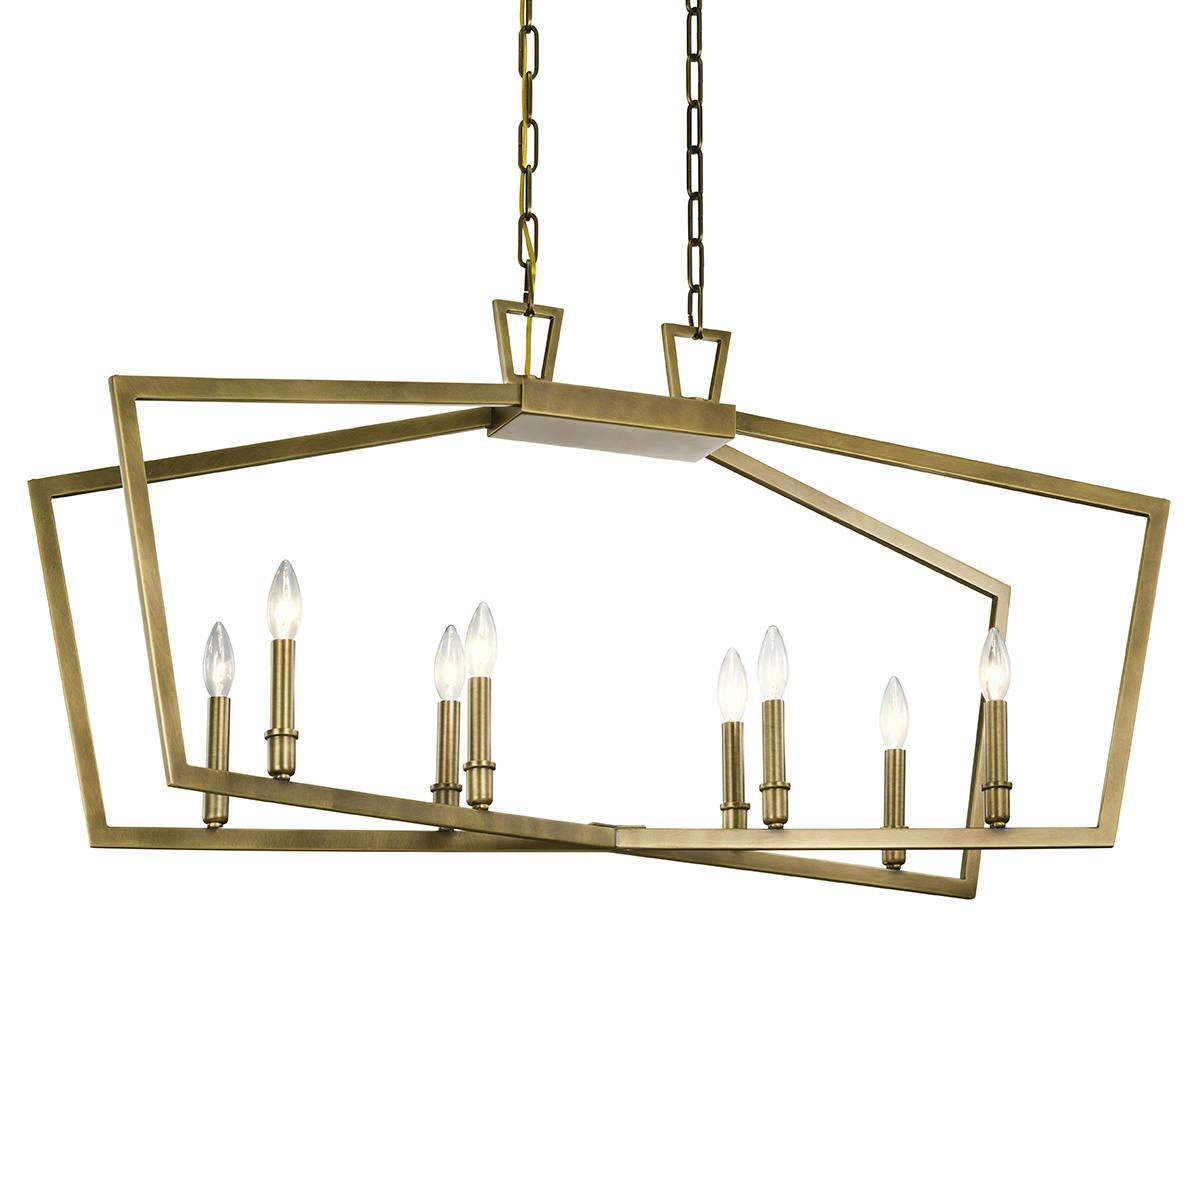 Close up view of the Abbotswell 42" Linear Chandelier Brass on a white background